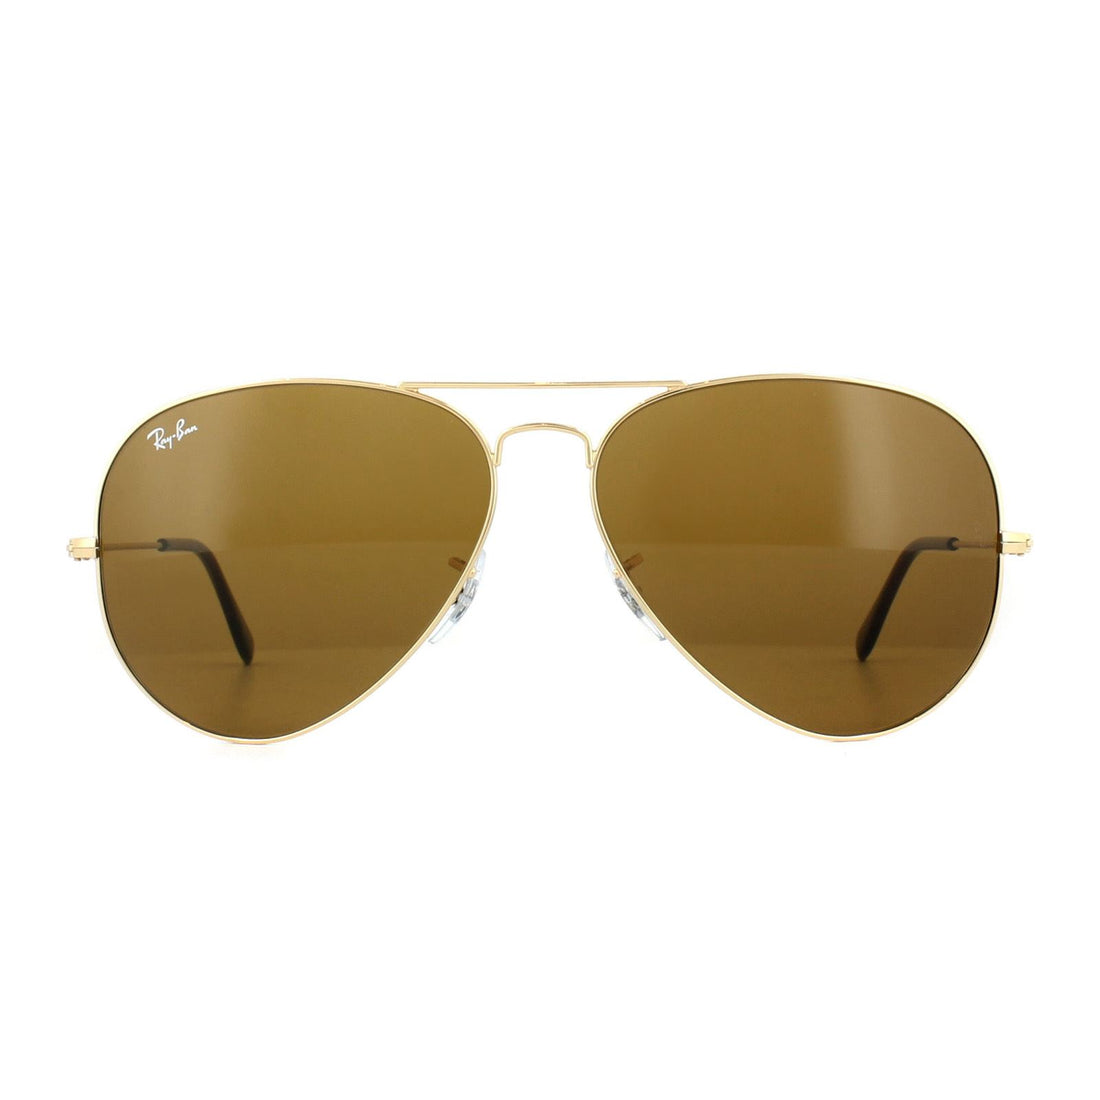 Ray-Ban Aviator Classic RB3025 Sunglasses Gold / Brown 62